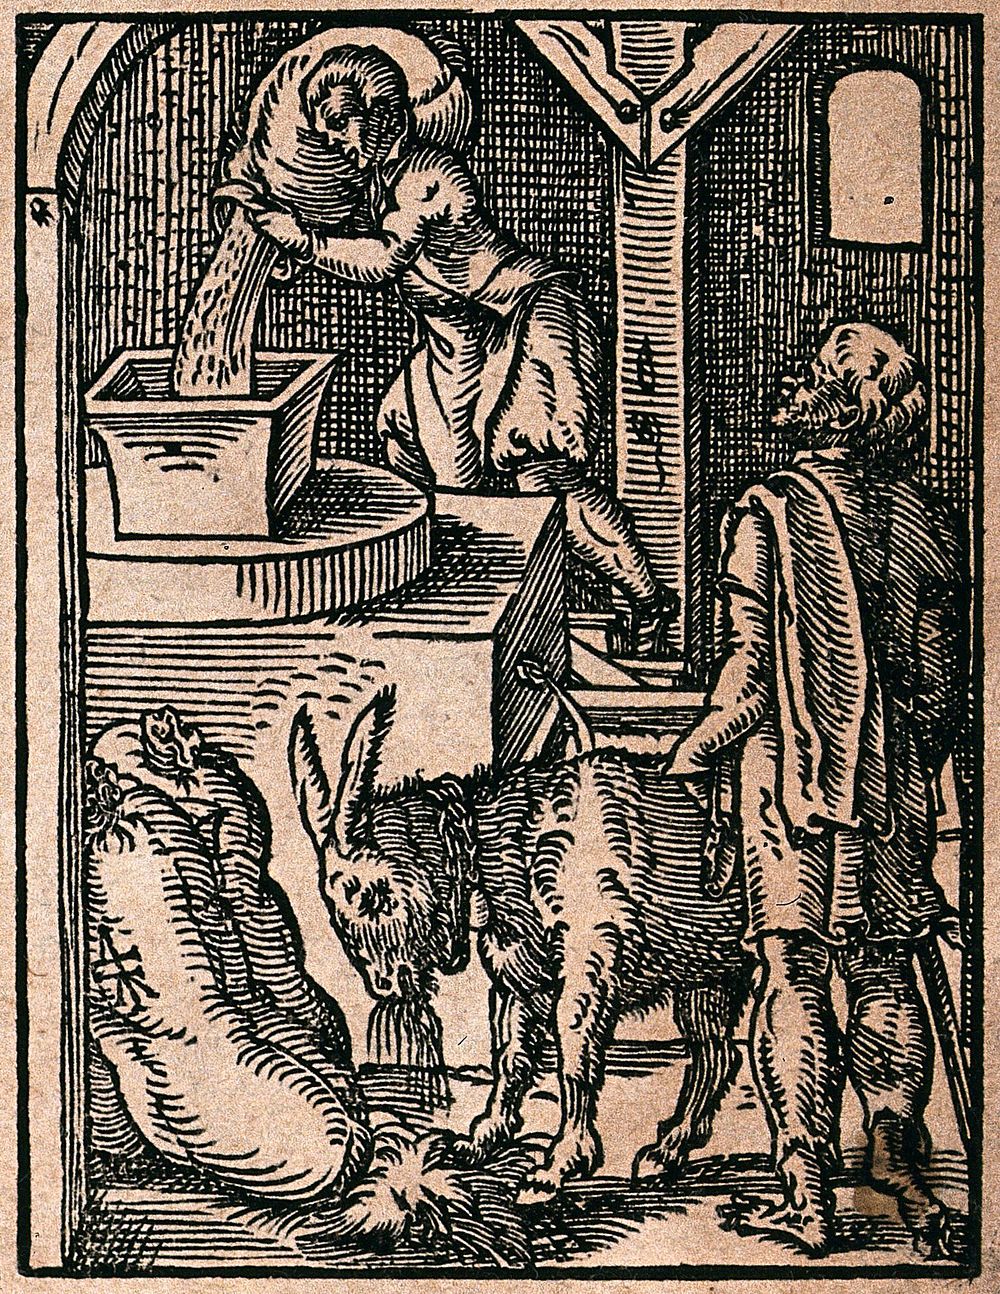 A miller pours grain into a mill from a sack brought by a donkey. Woodcut by J. Amman.